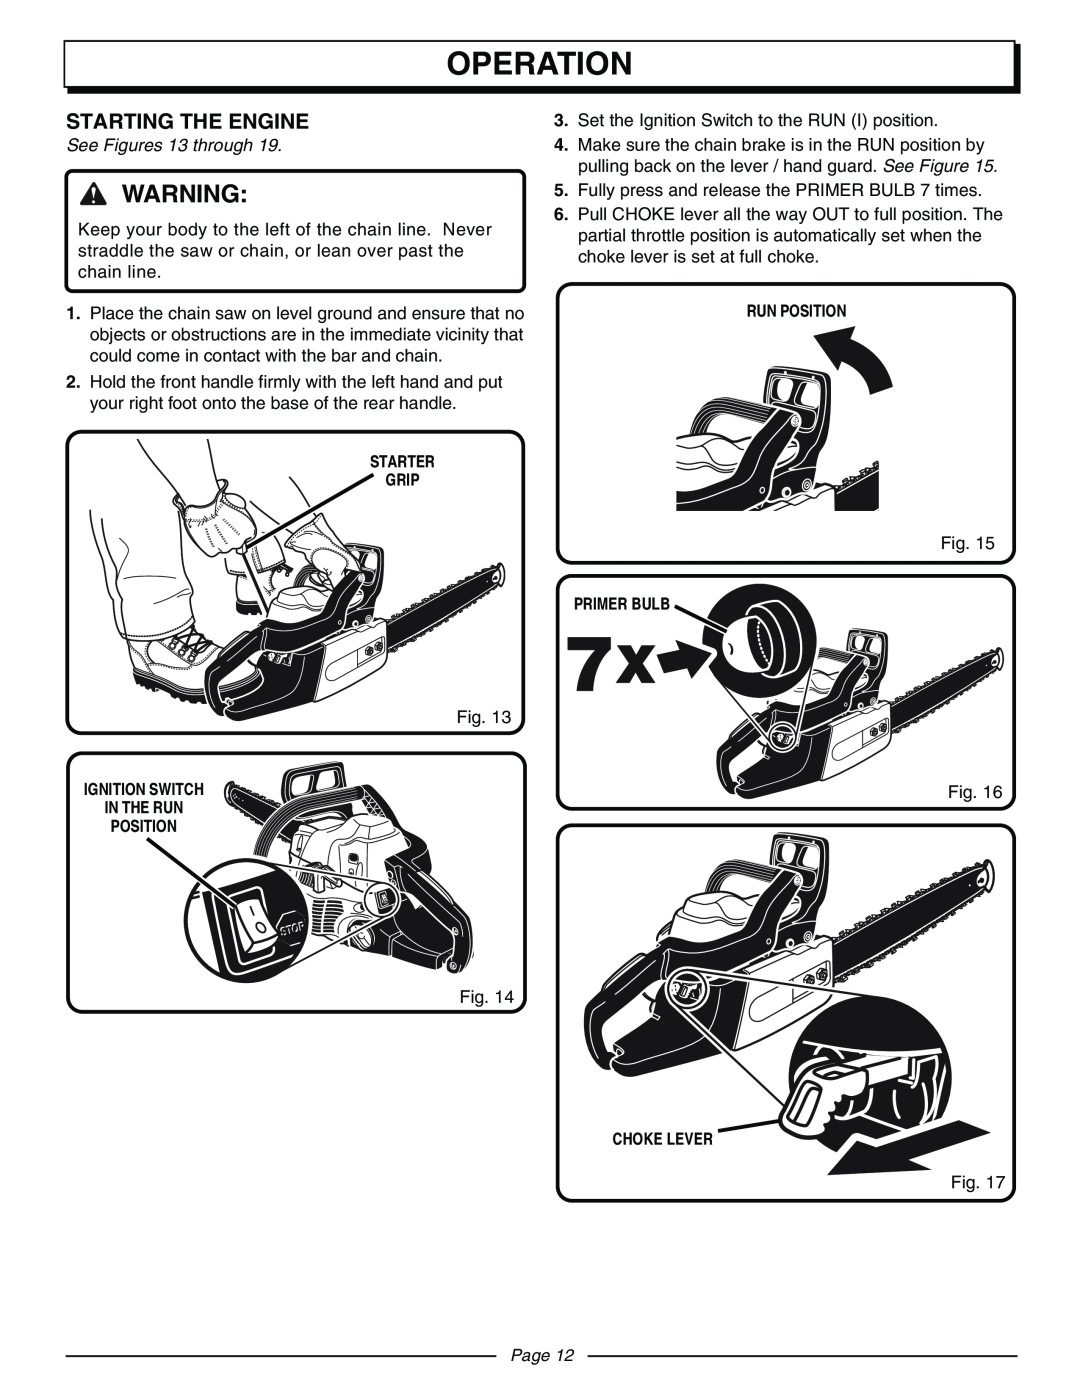 Homelite UT10570 manual Starting The Engine, Operation, See Figures 13 through, Page 